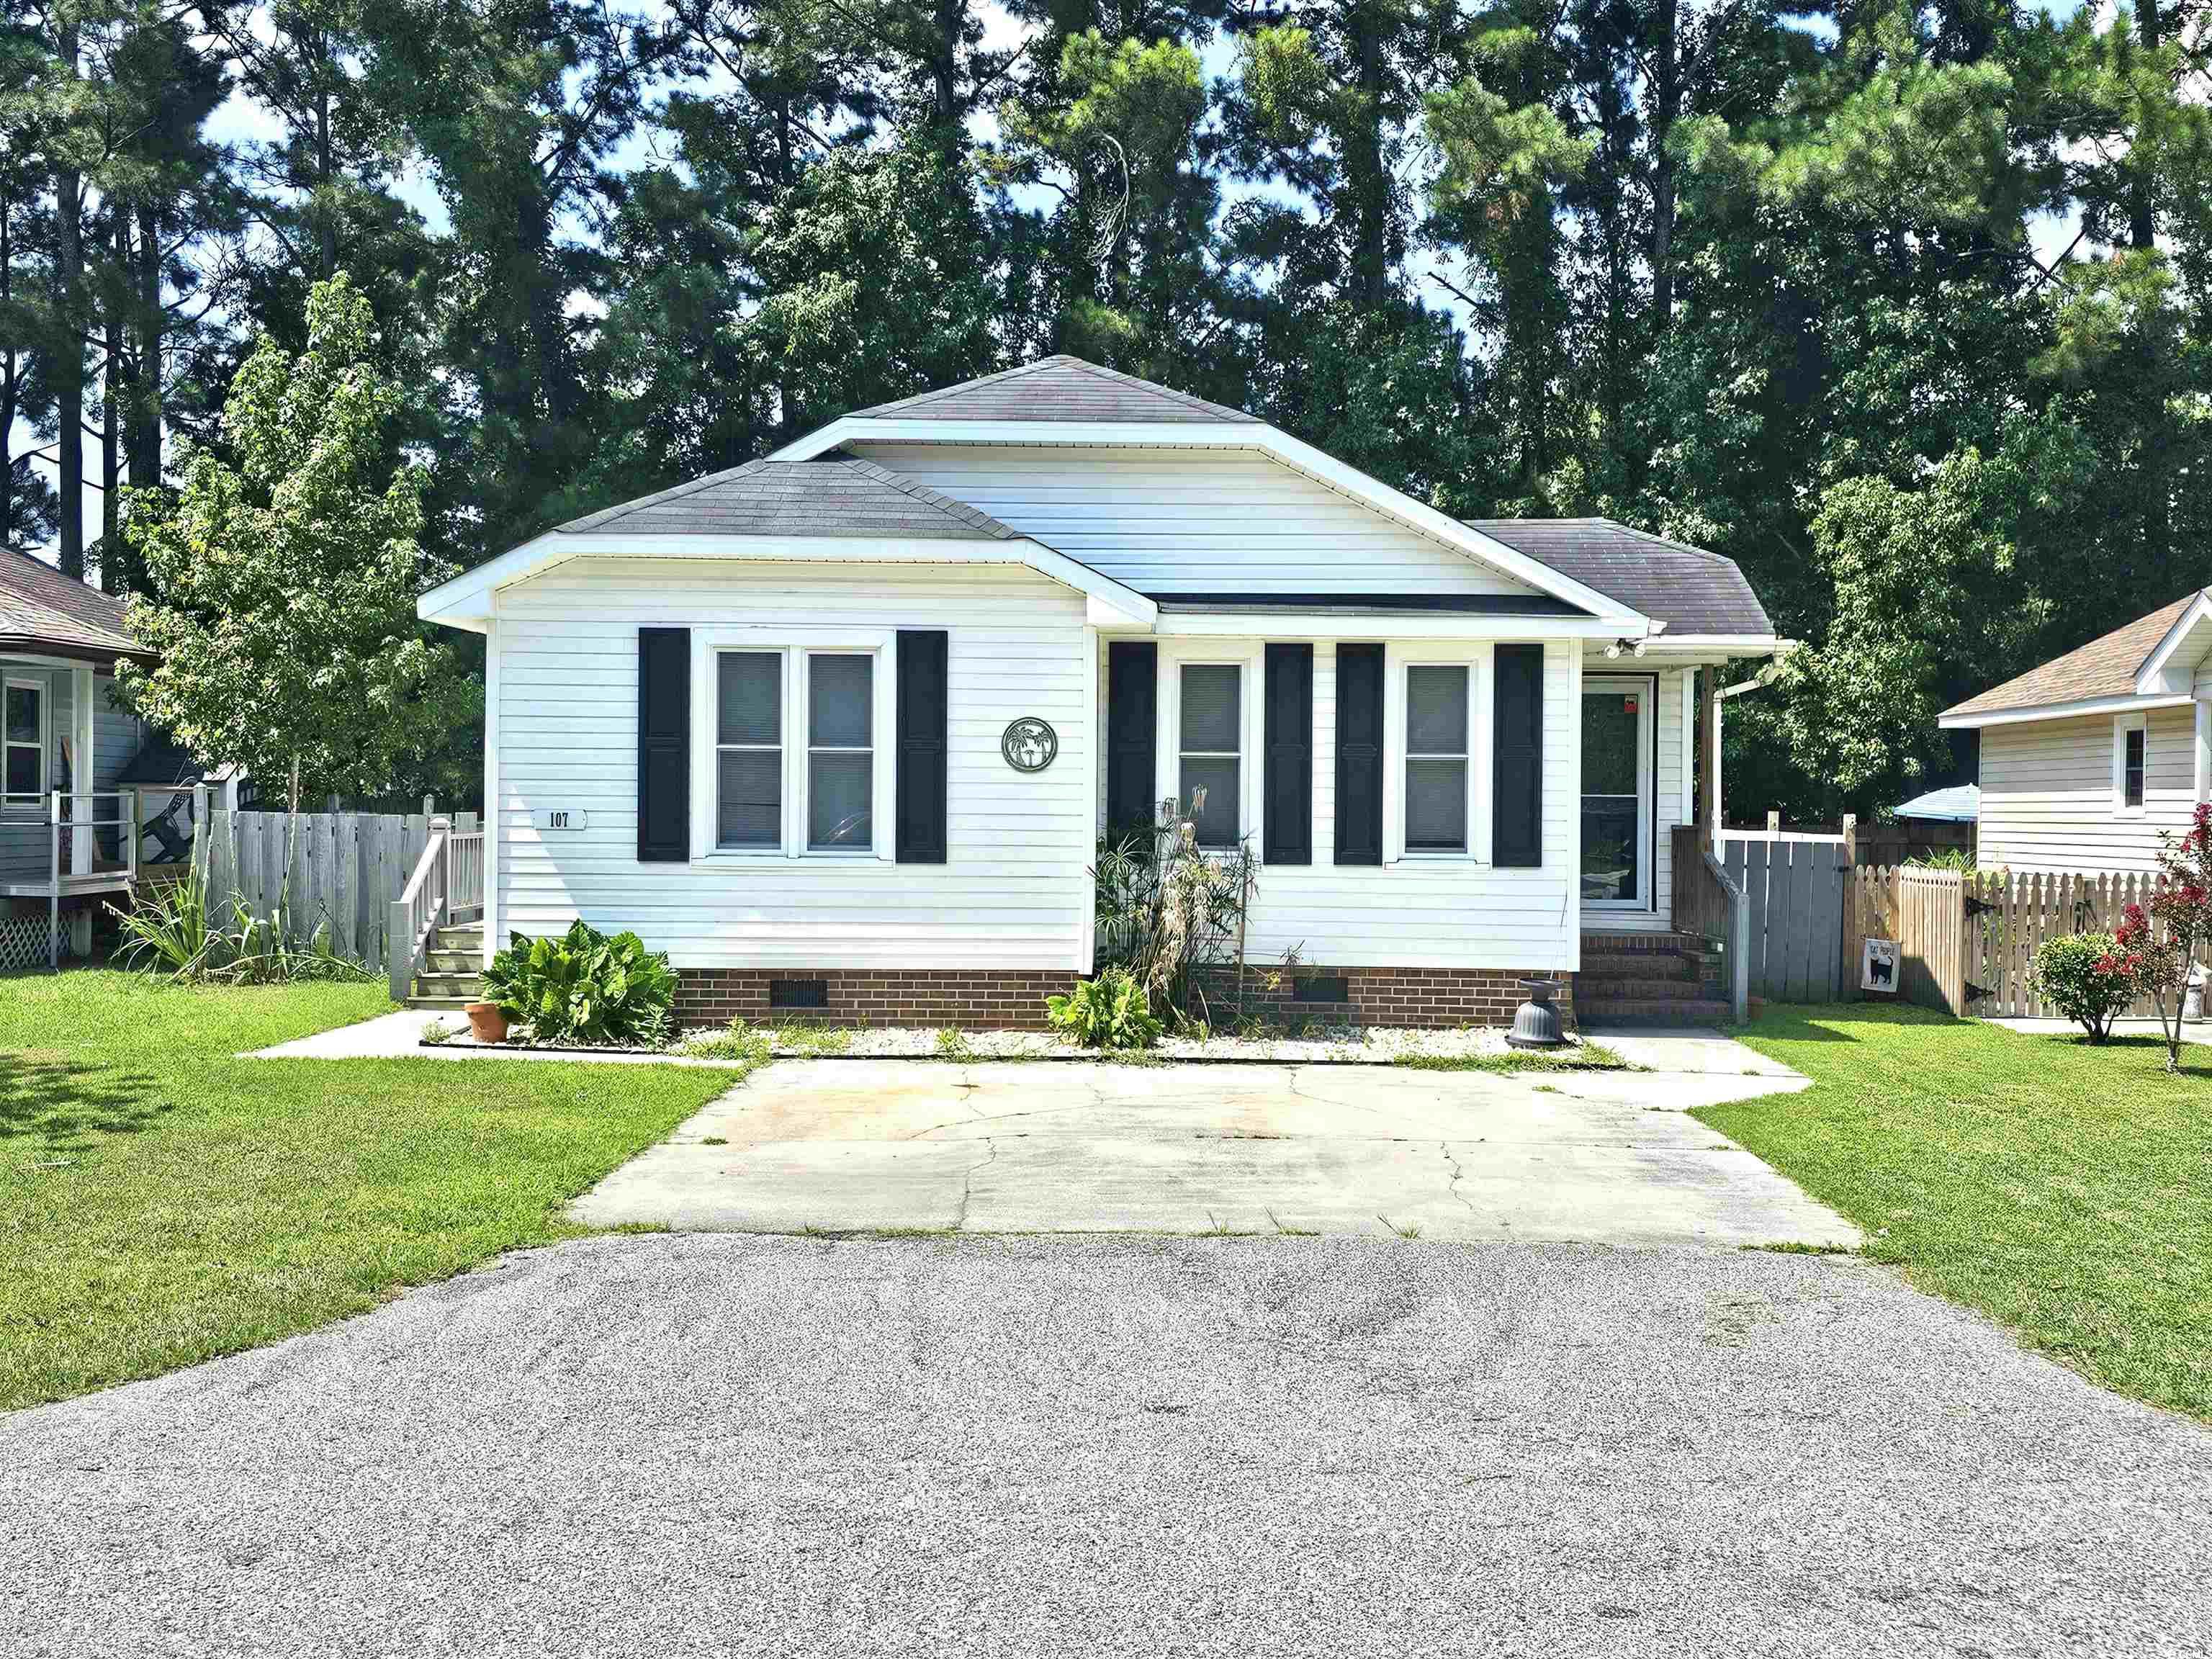 107 Countryside Dr. Myrtle Beach, SC 29579